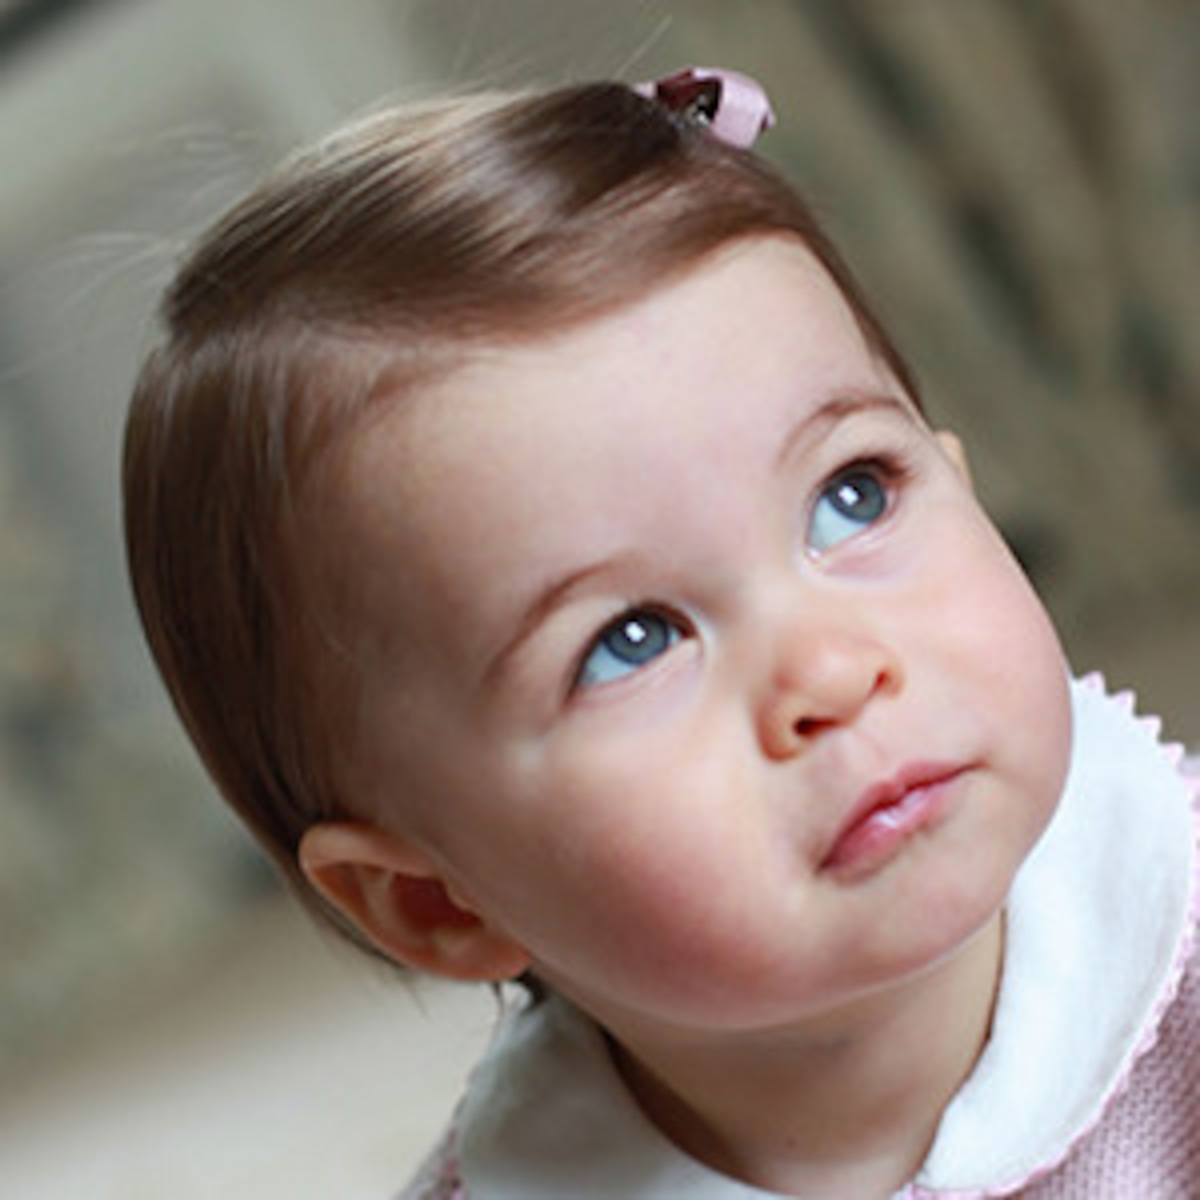 Princess Charlotte Looks Like Her Brother Prince George in New Photos - Online